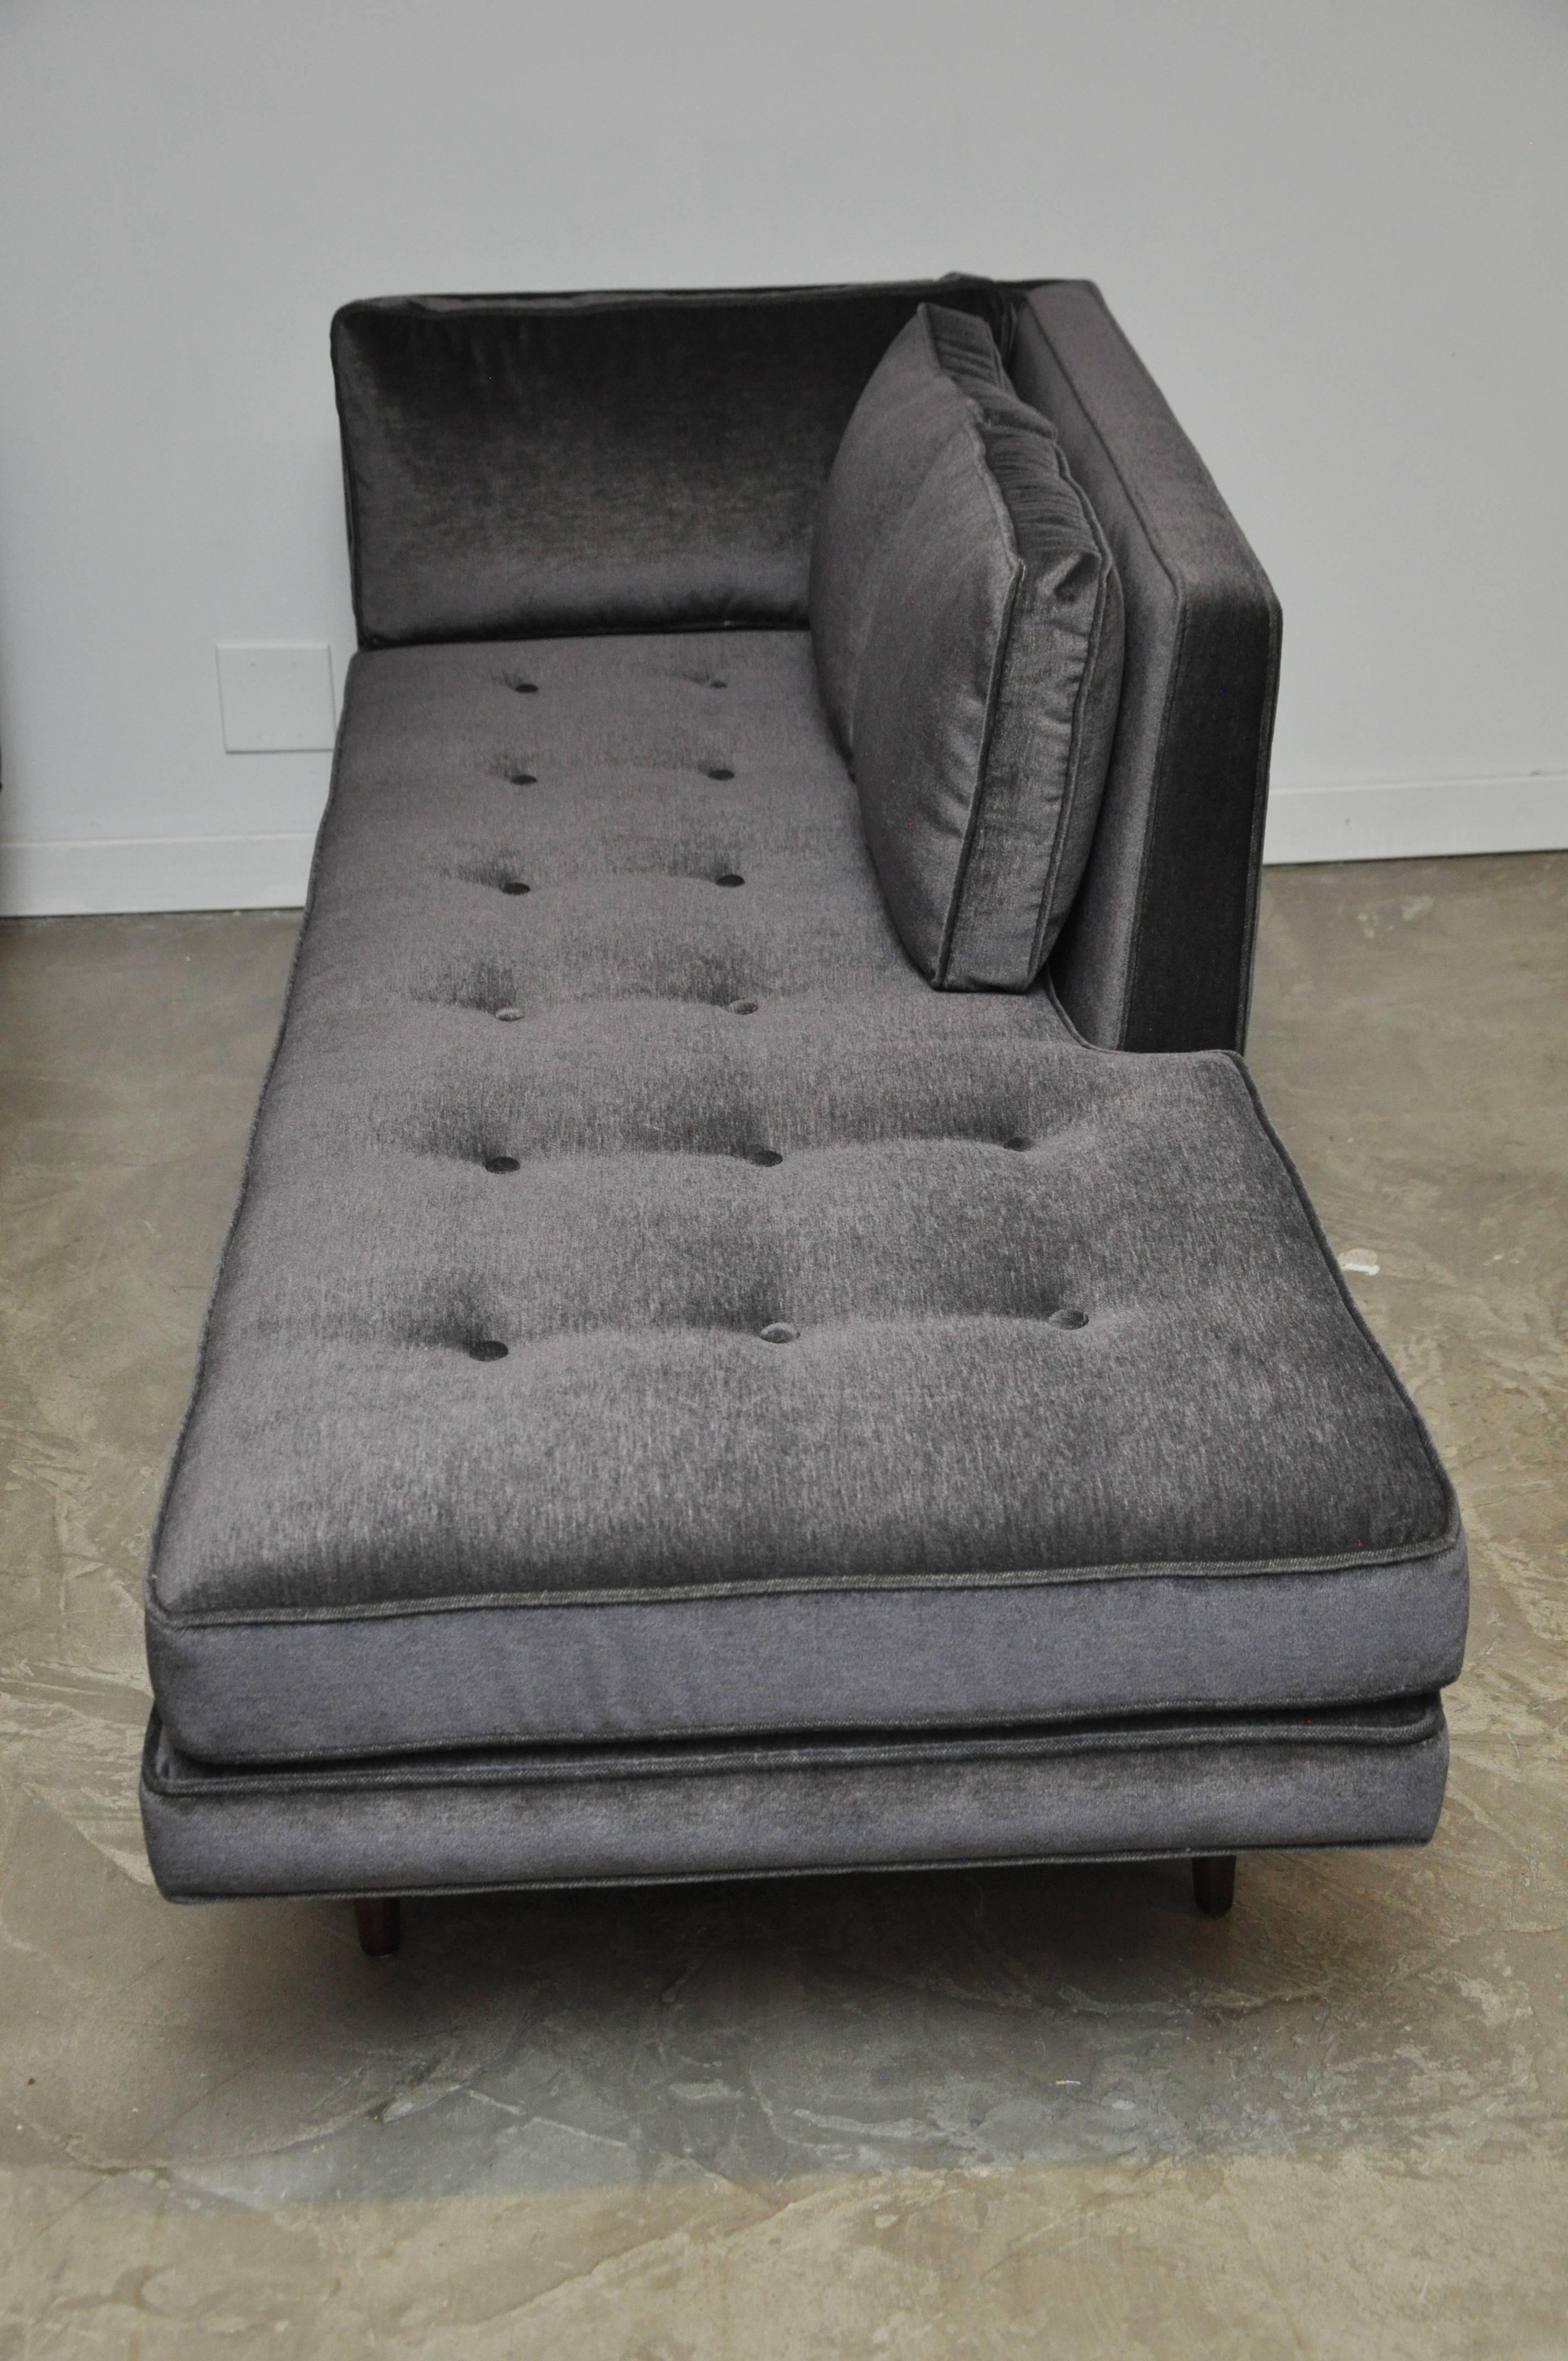 Left arm chaise model 5525 designed by Edward Wormley for Dunbar. Fully restored. Newly upholstered in charcoal mohair. 